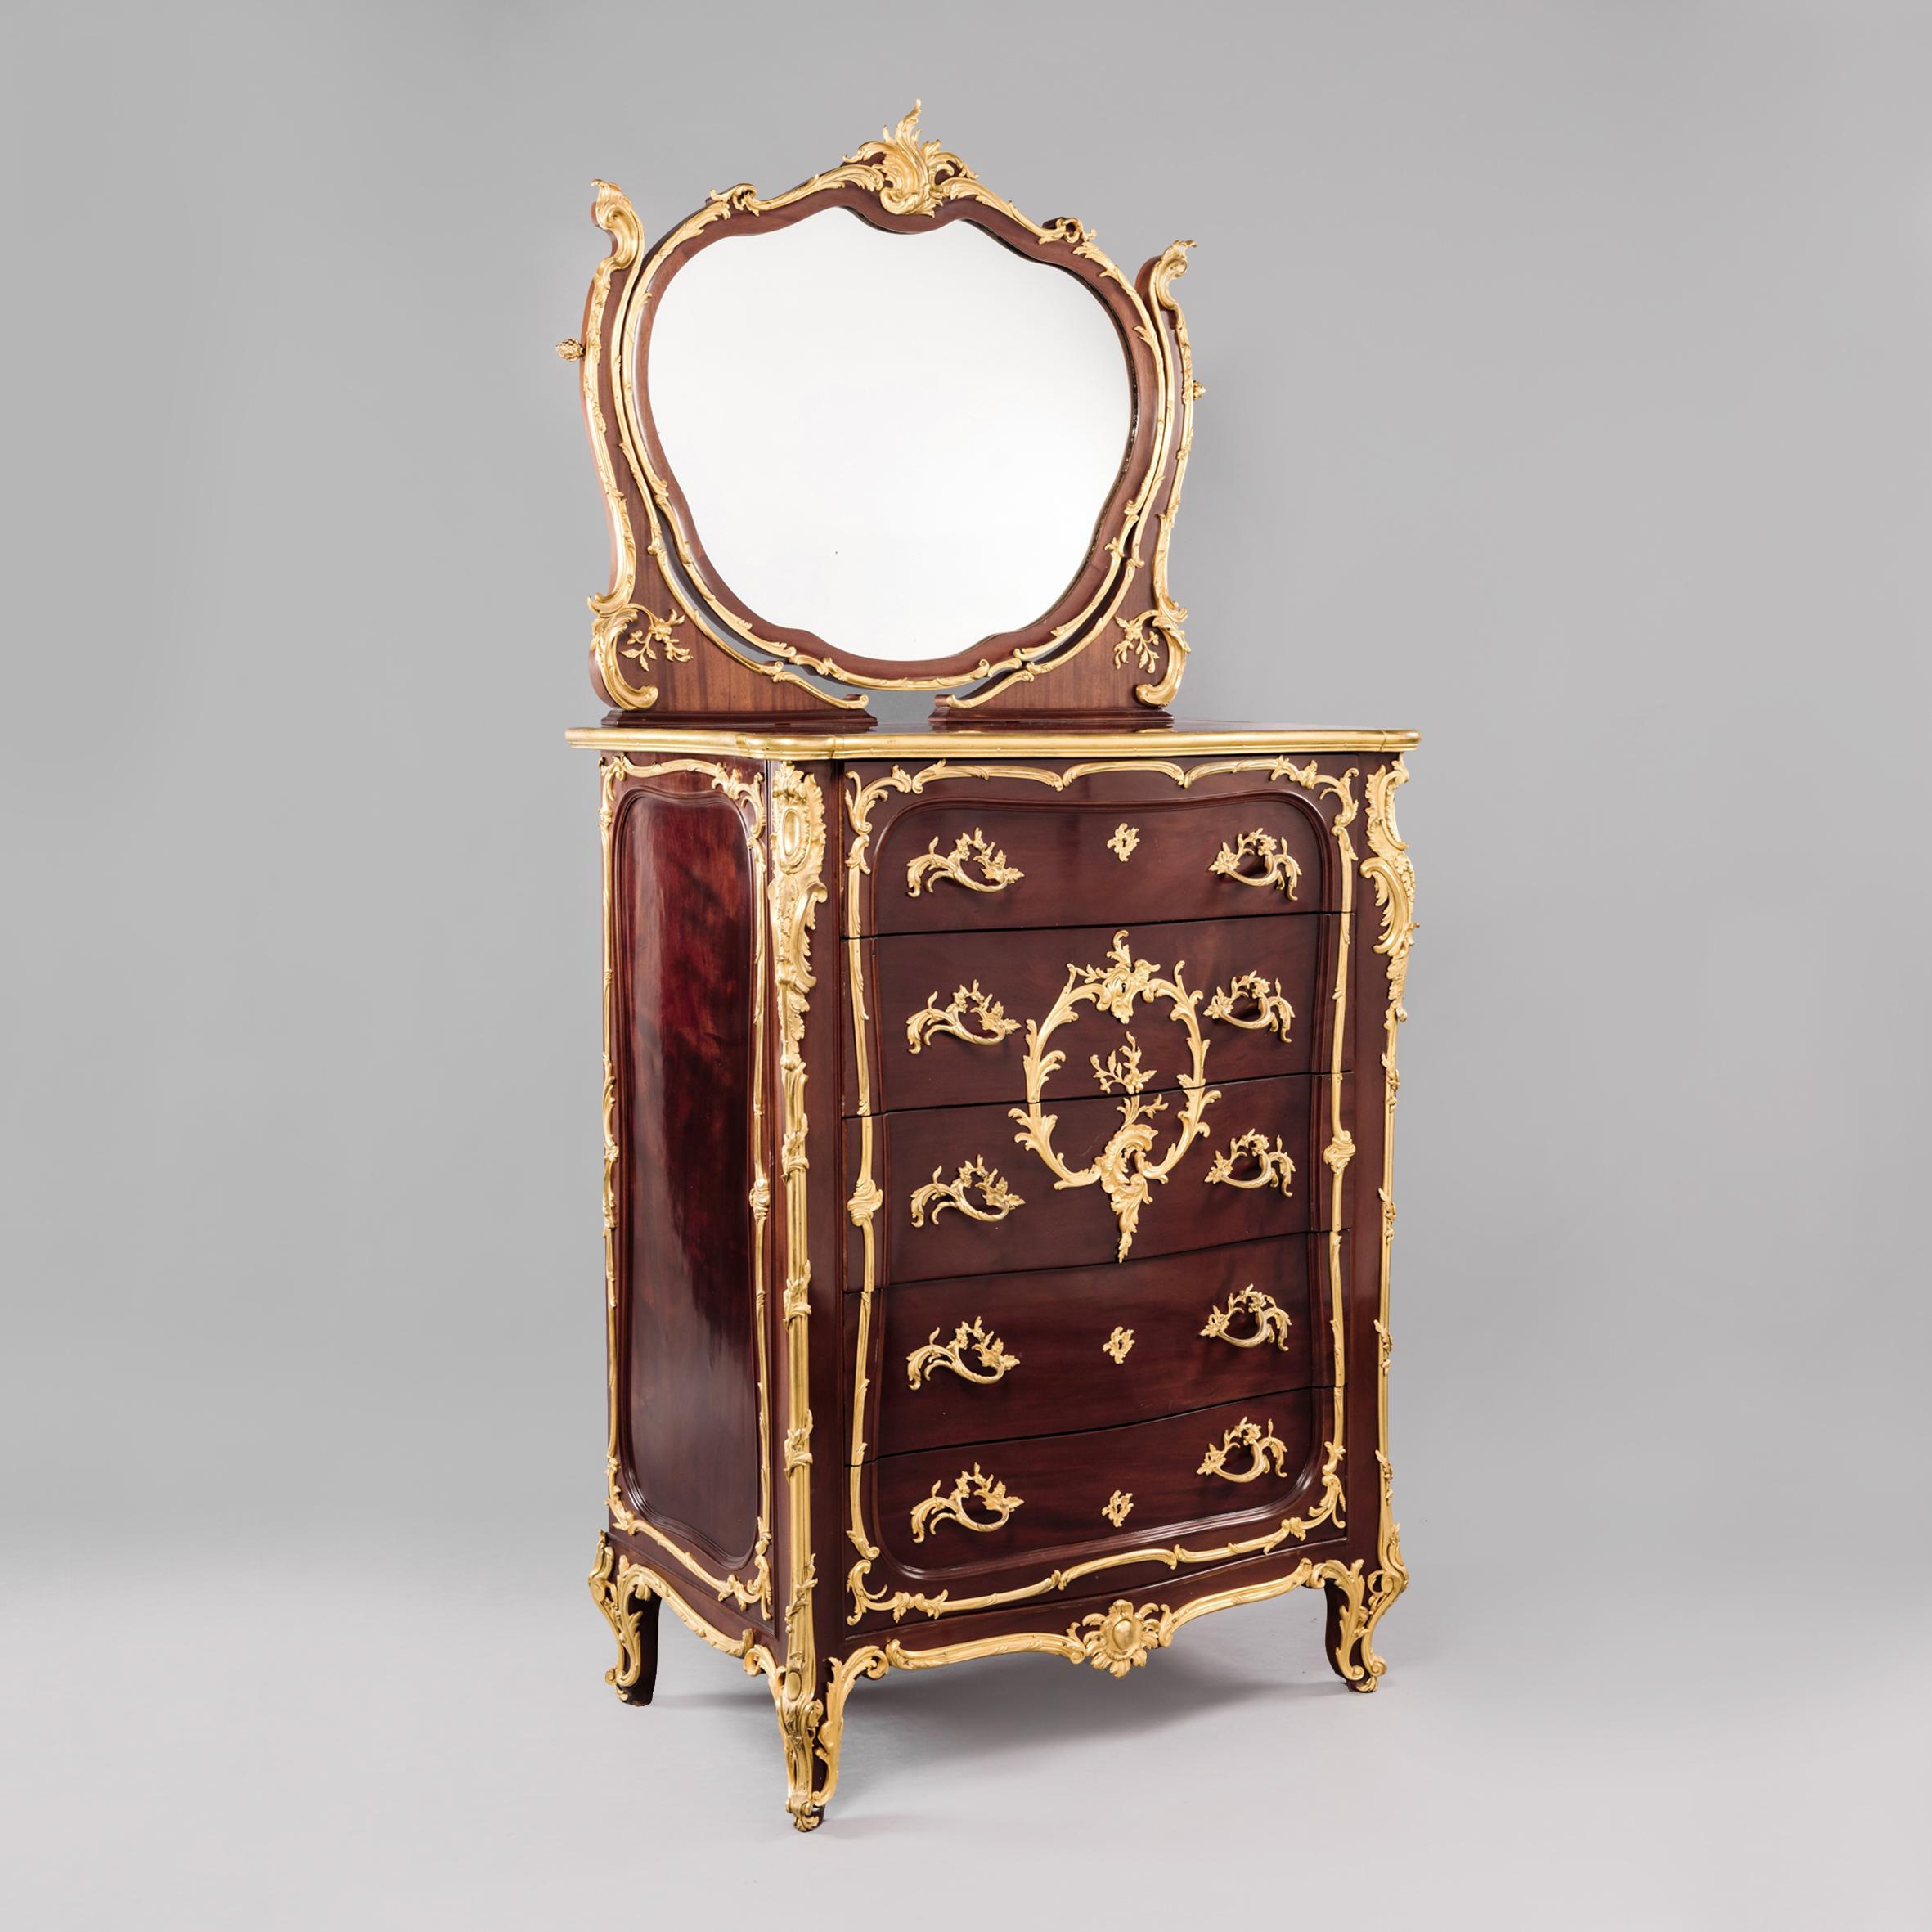 A Louis XV style gilt bronze mounted mahogany Coiffeuse attributed to François Linke. 

François Linke

François Linke (1855 - 1946) was the most important Parisian cabinet maker of the late 19th and early twentieth centuries, and possibly the